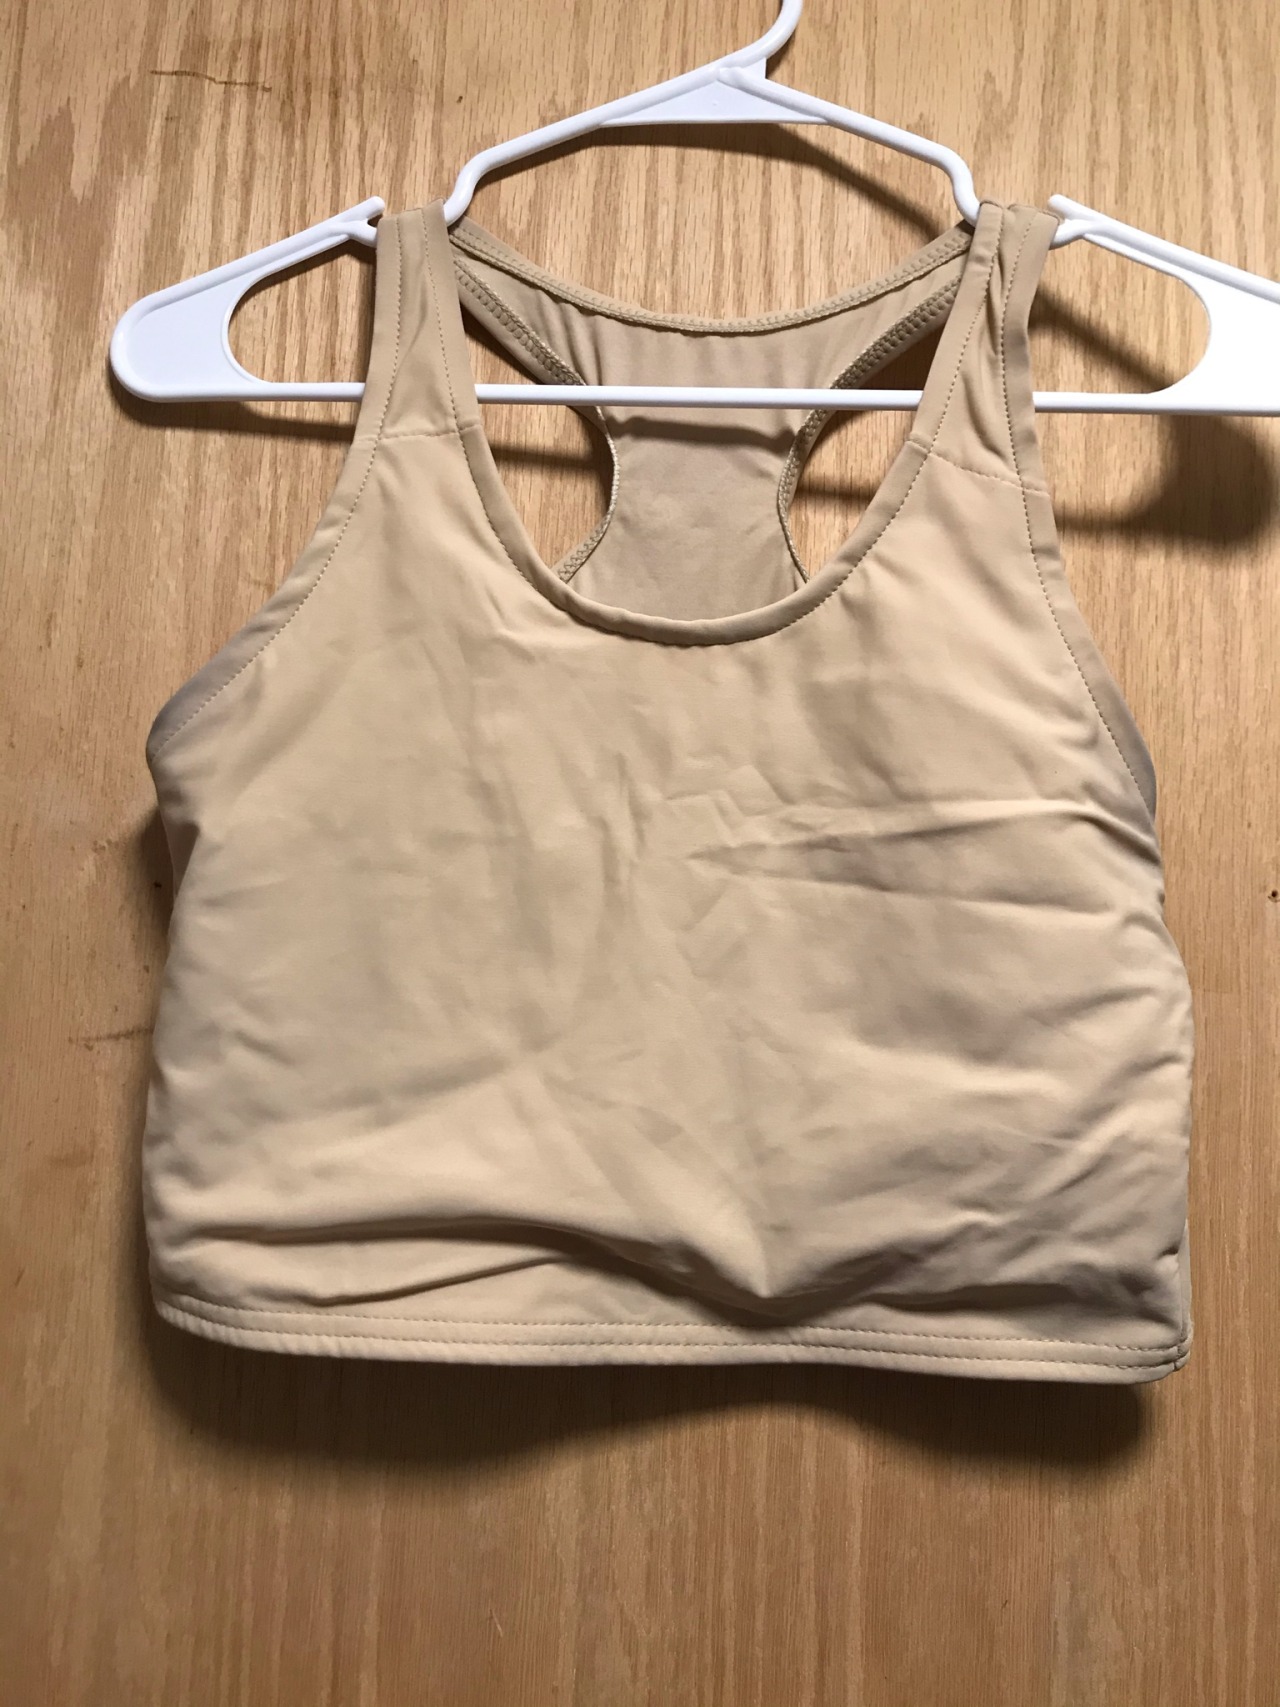 The Tumblr Transgender Clothing Exchange — Clothes for sale! I'm